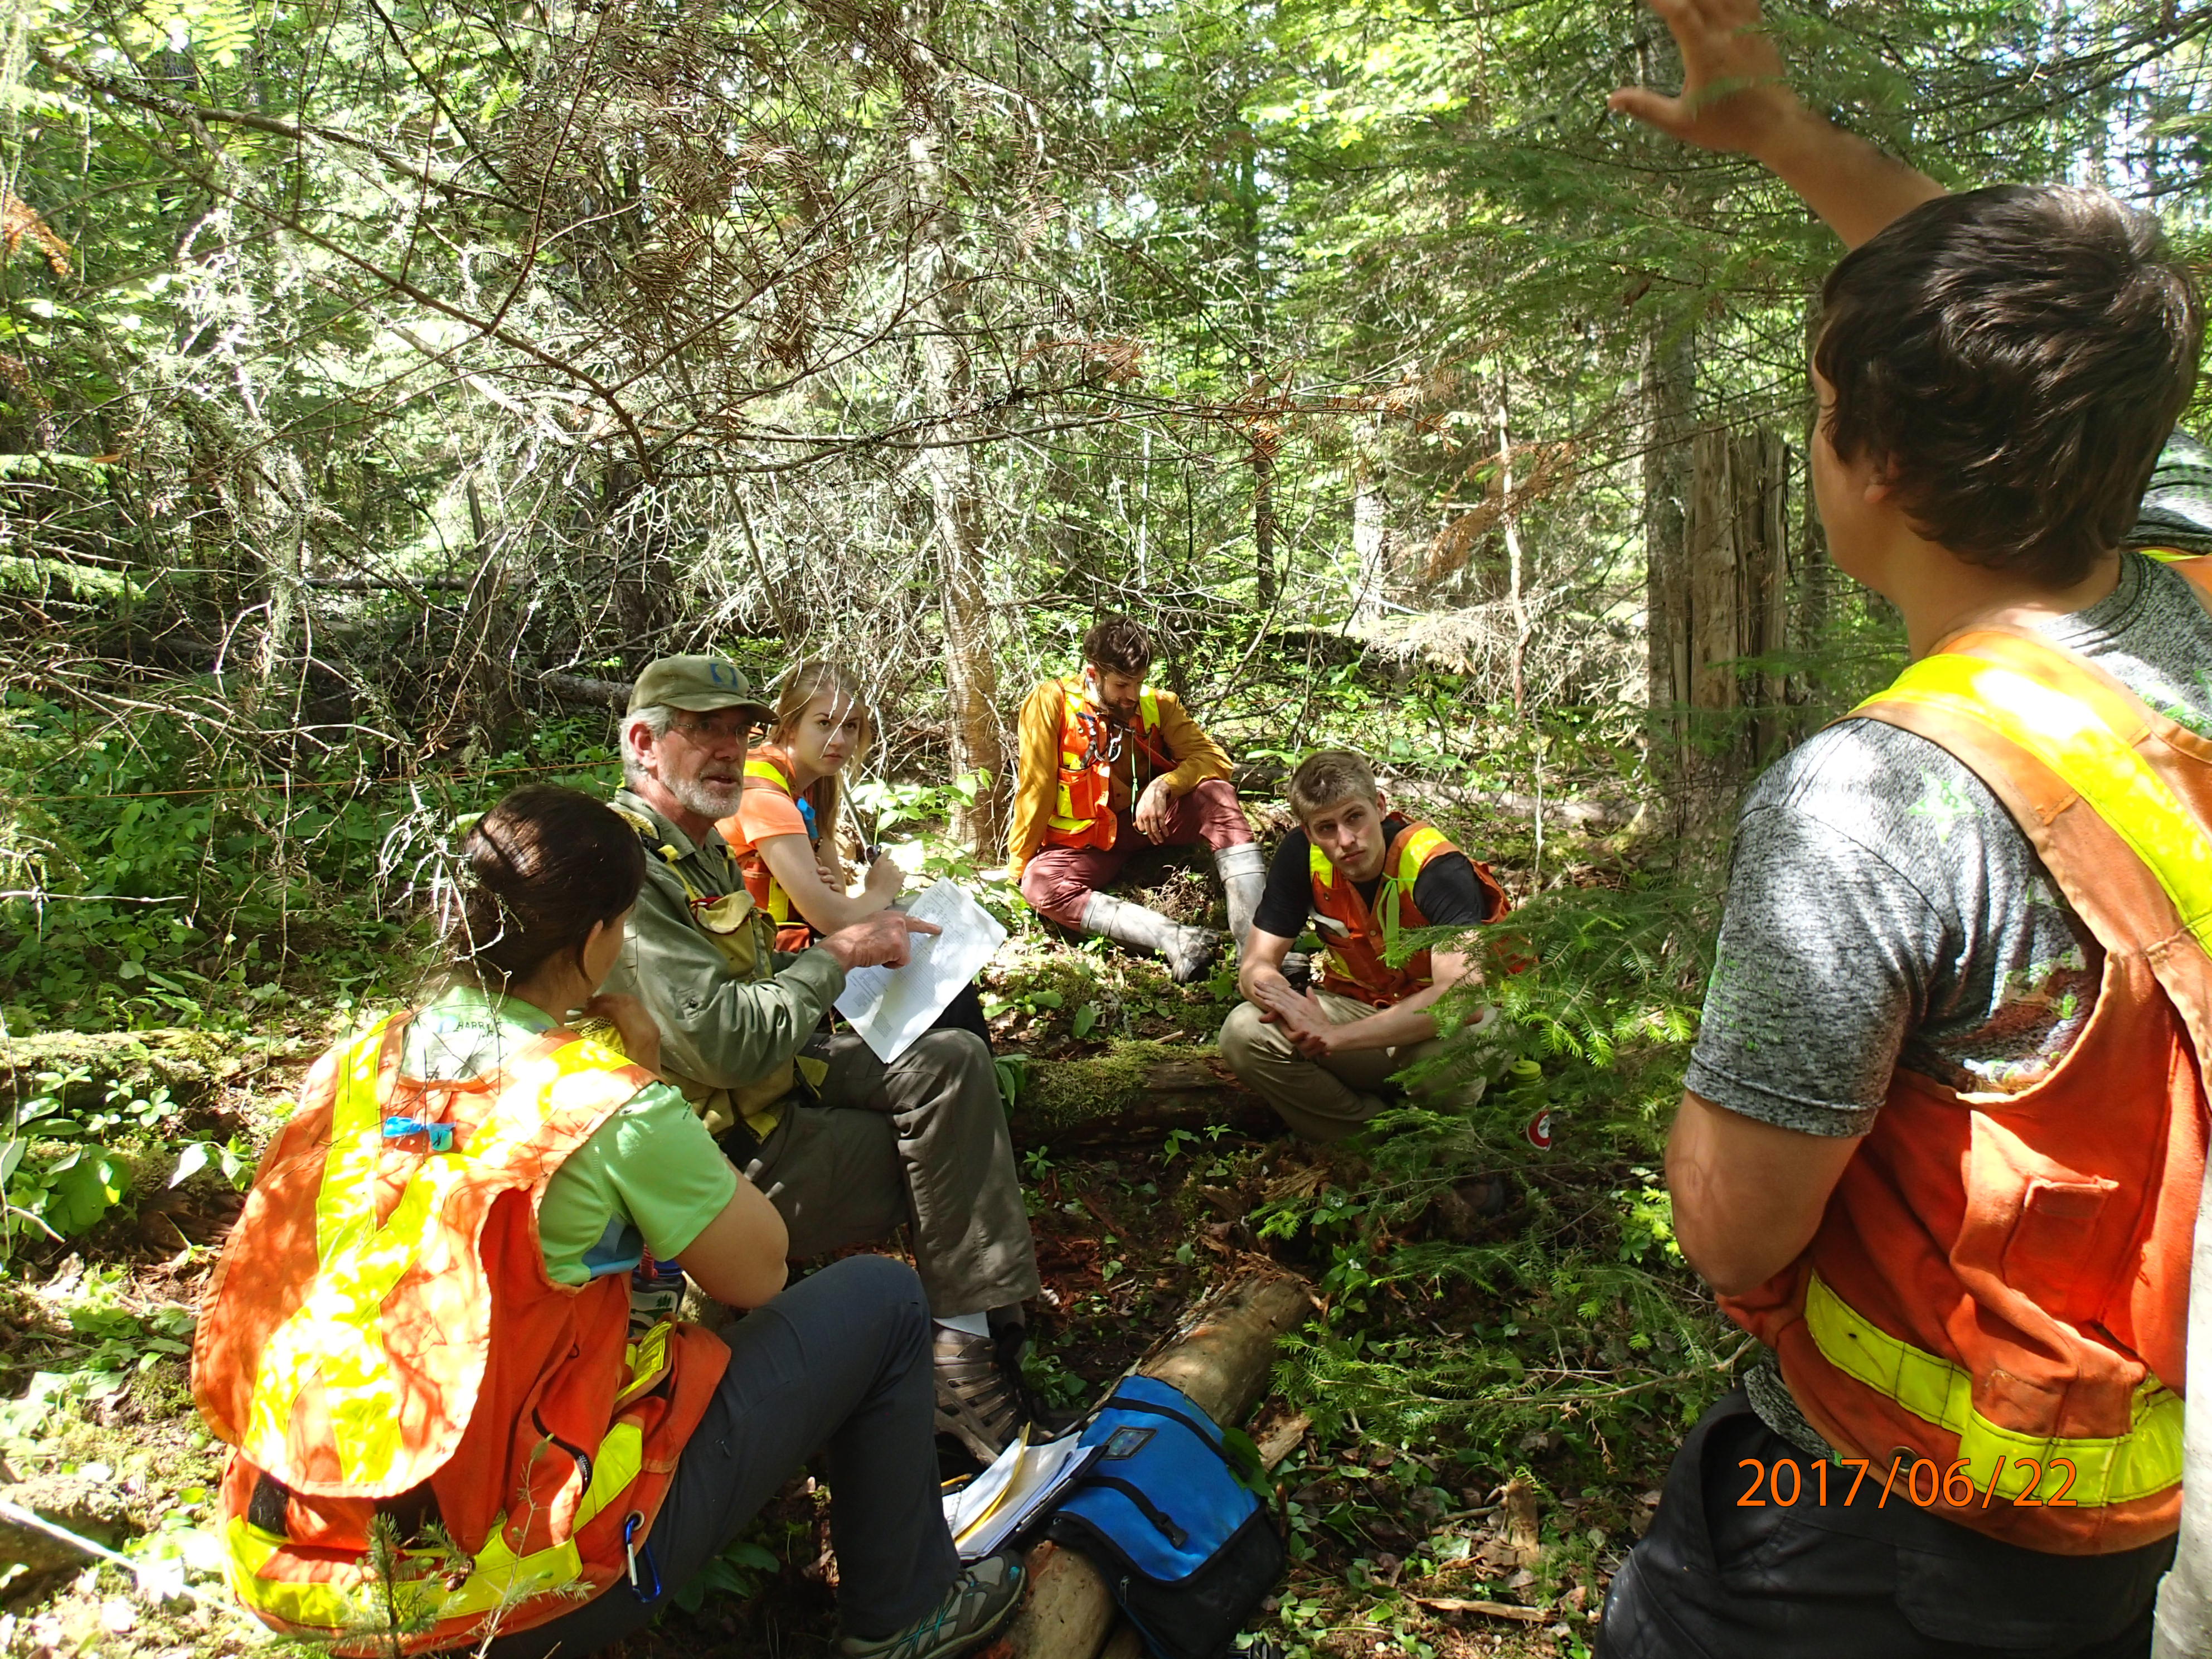 Quetico Foundation Student Summer Research Team familiarizes with vegetation monitoring, with Gerry Racey, before getting further insight into studies of wildfires and planned fire management on a summer-long wilderness canoe excursion. Learn about the work that the Student Summer Research Program does and learn more about the Quetico Foundation here: https://queticofoundation.org/what-we-do/programs/ Photo credit: Brian Jackson, Quetico Provincial Park Biologist